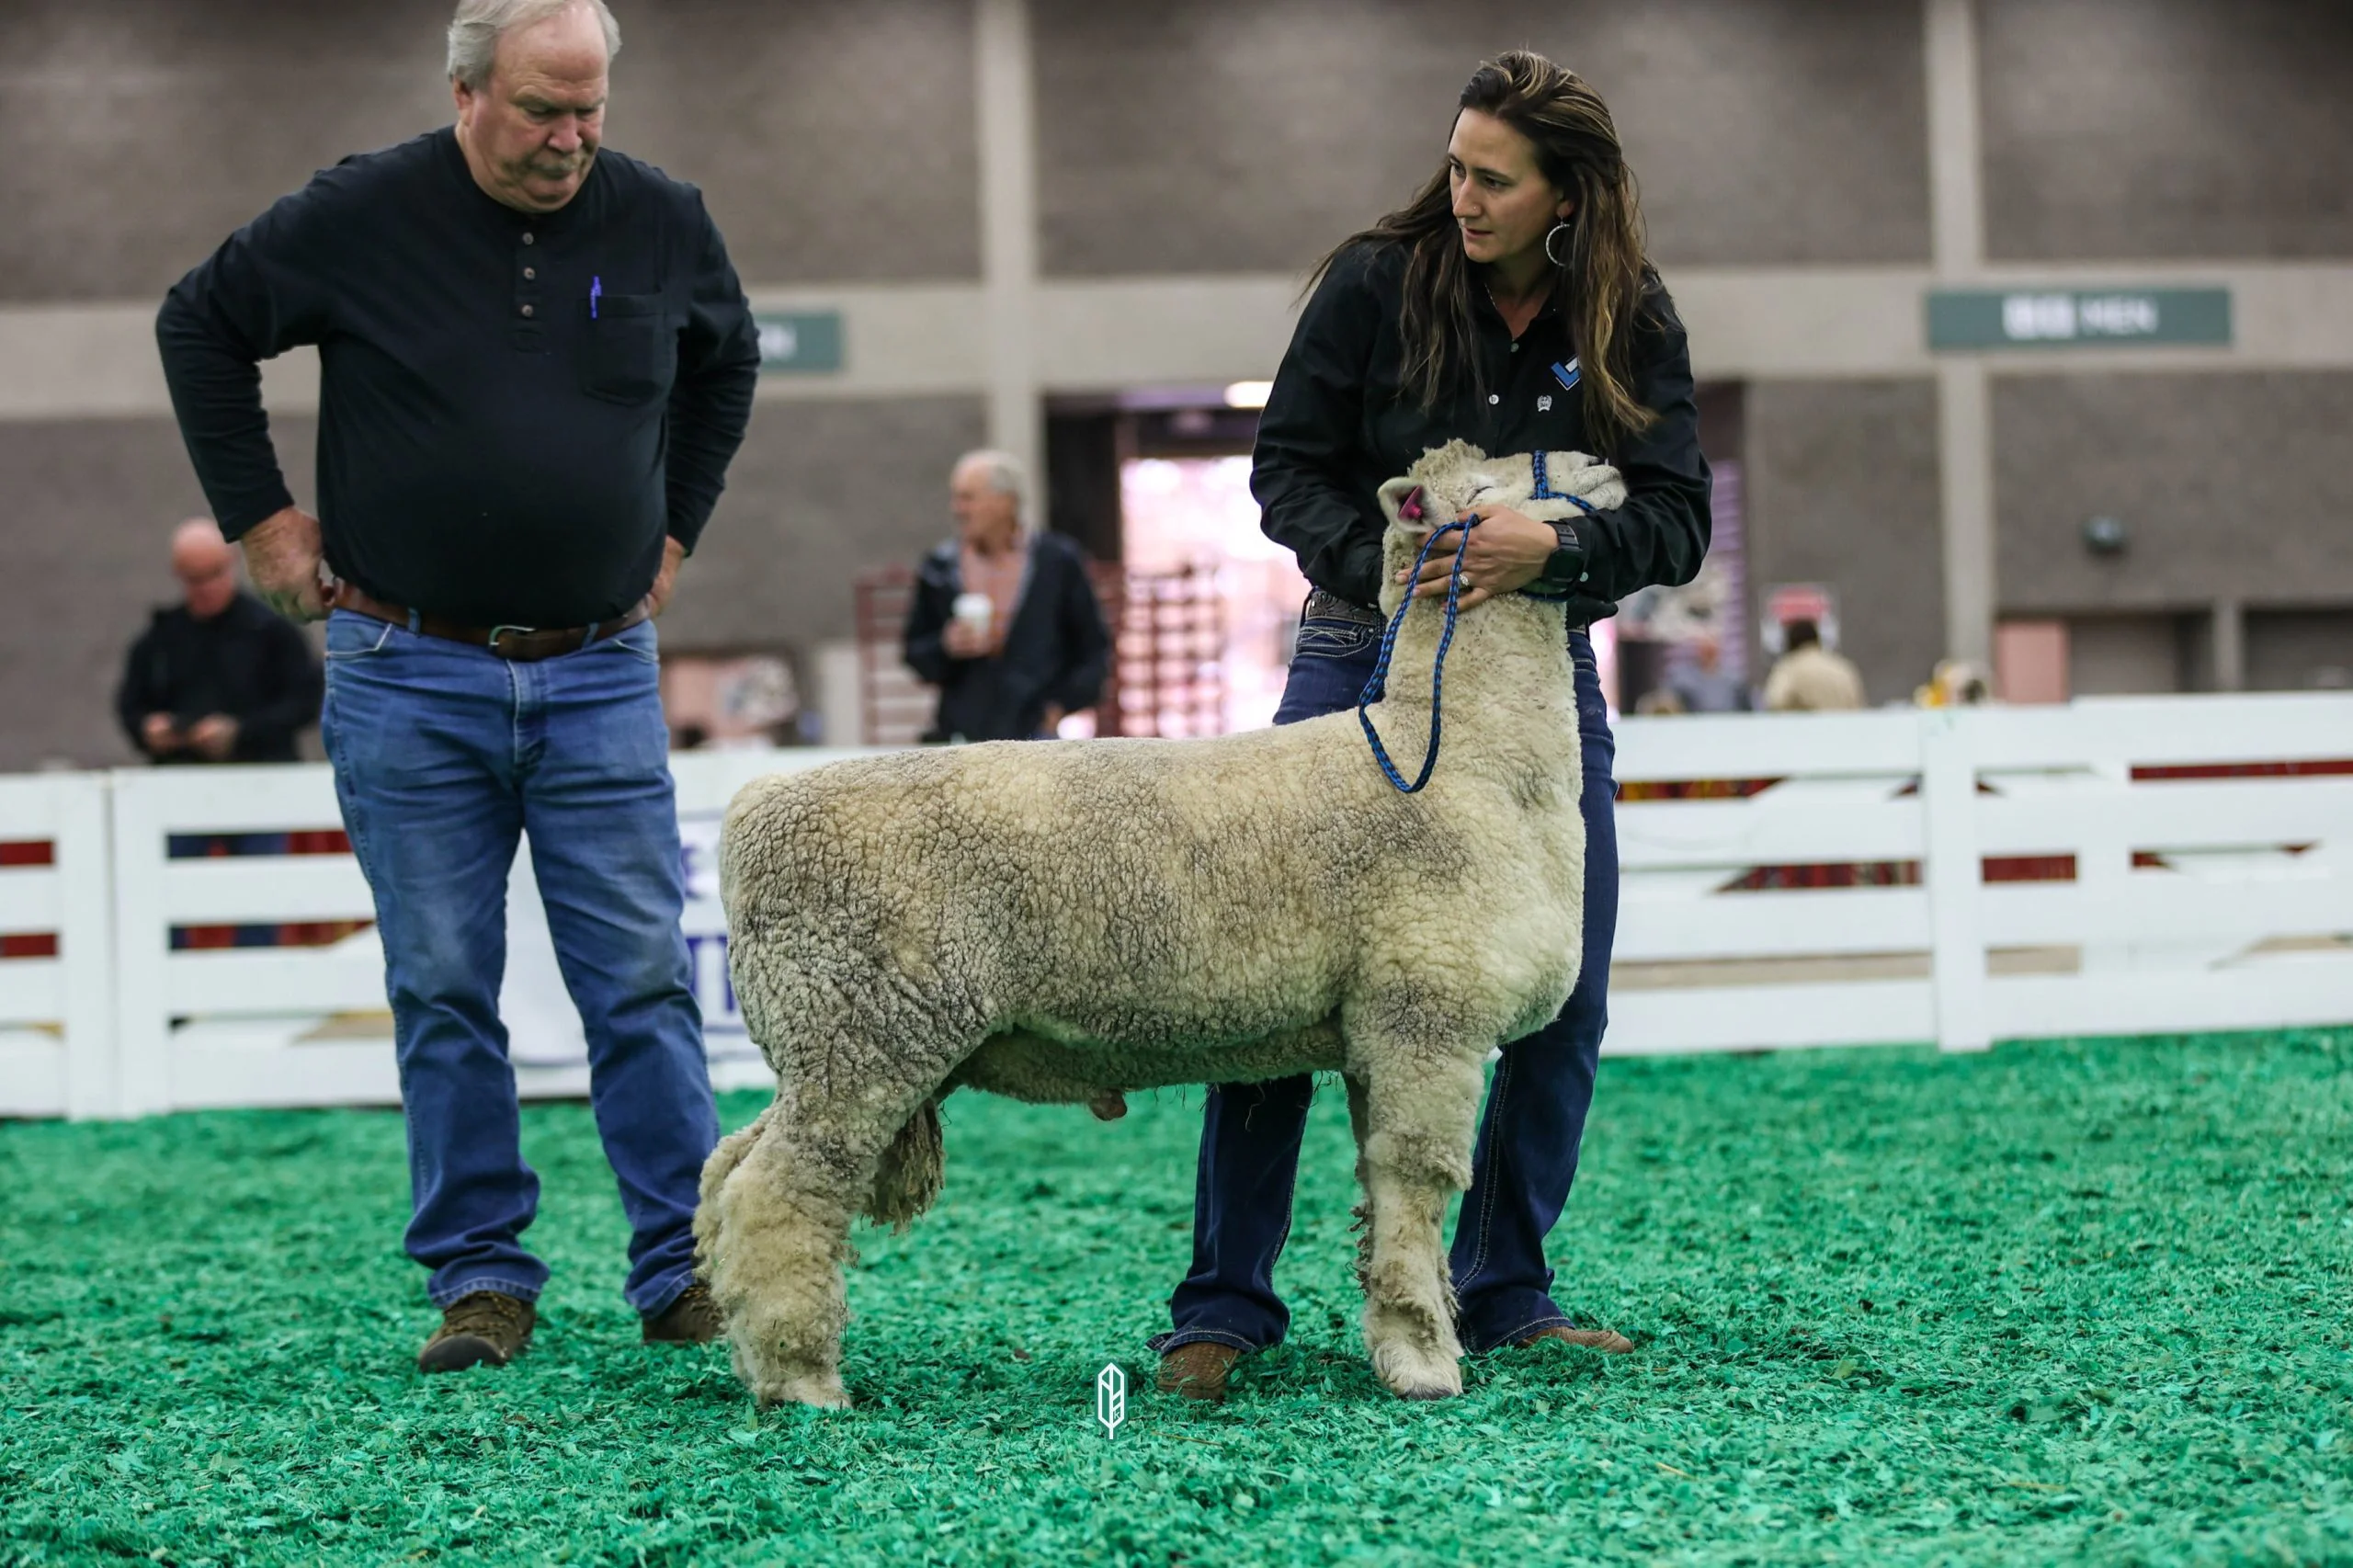 2023 National White Romney Show at NAILE
1st place spring ram lamb exhibited by Cassidy Lobdell